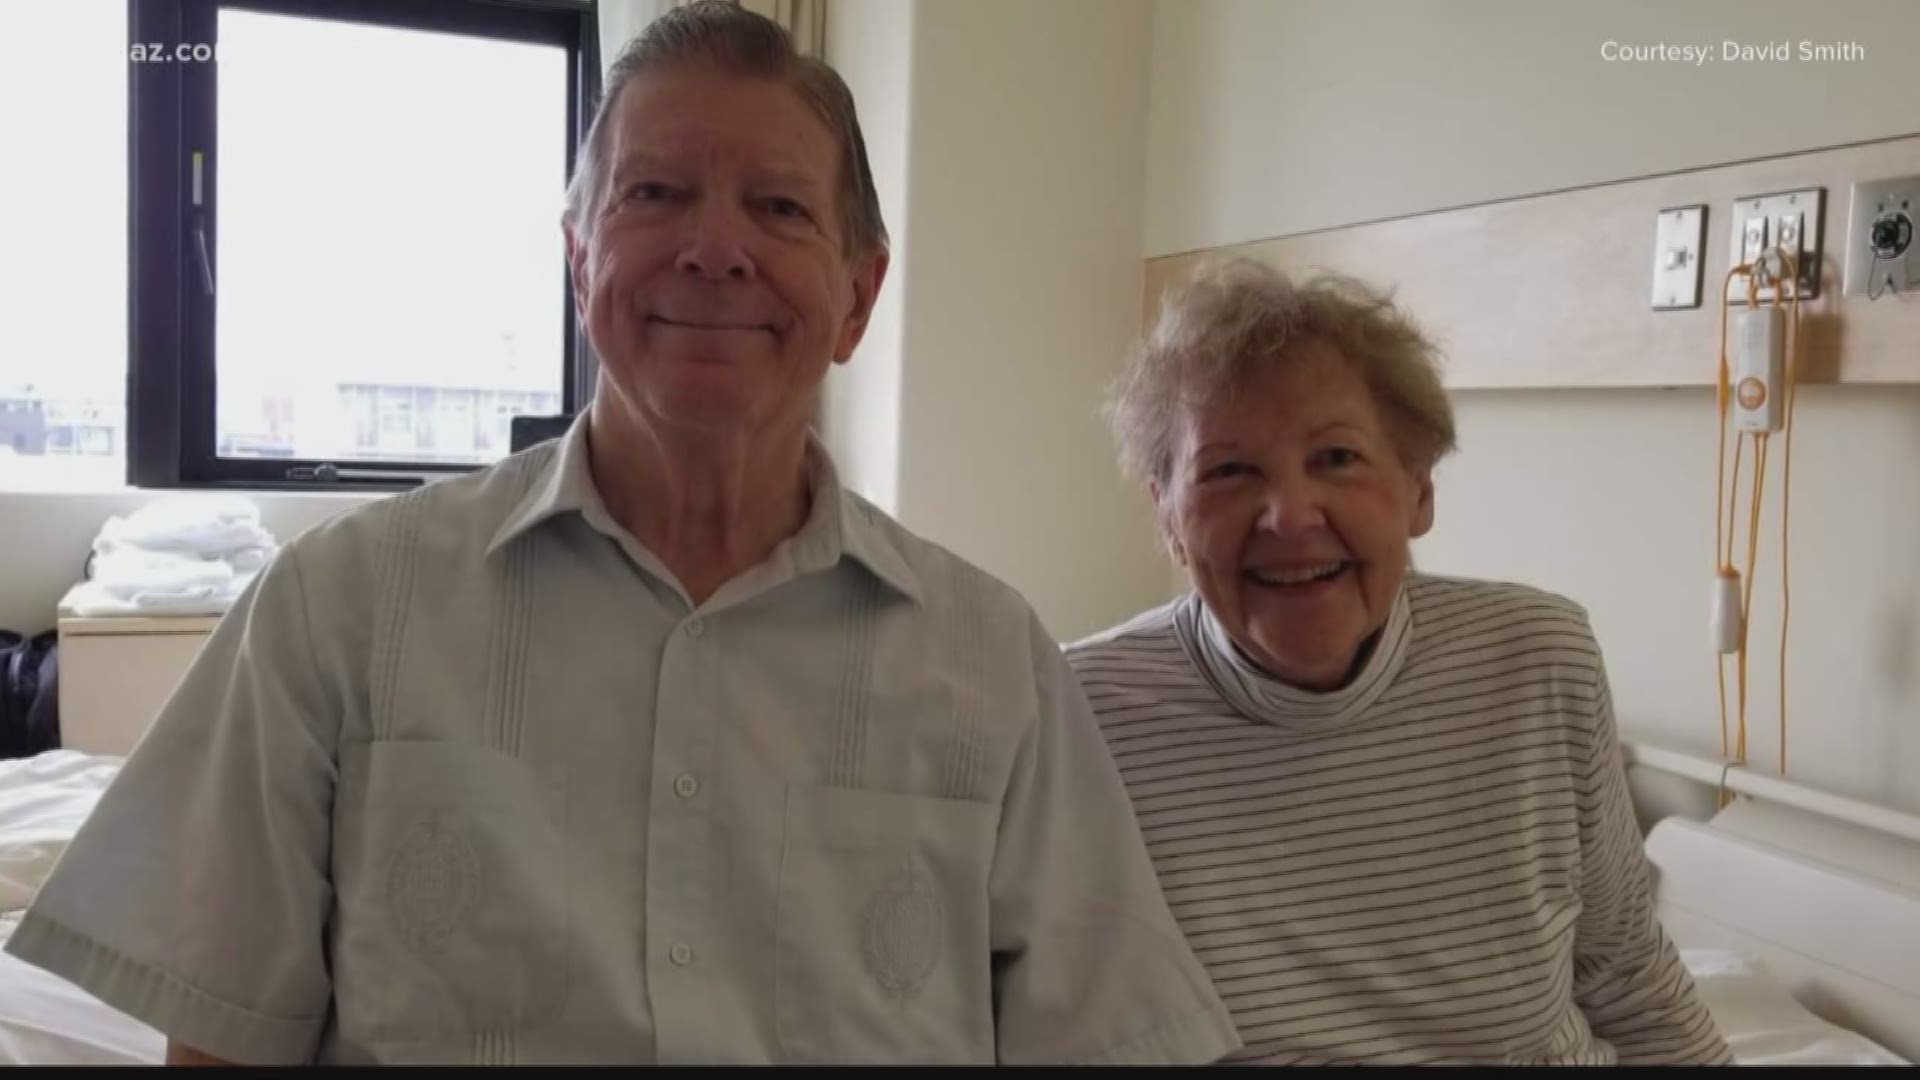 A Macon man says his parents are recovering in a Japanese hospital after becoming infected with the coronavirus on a cruise ship.